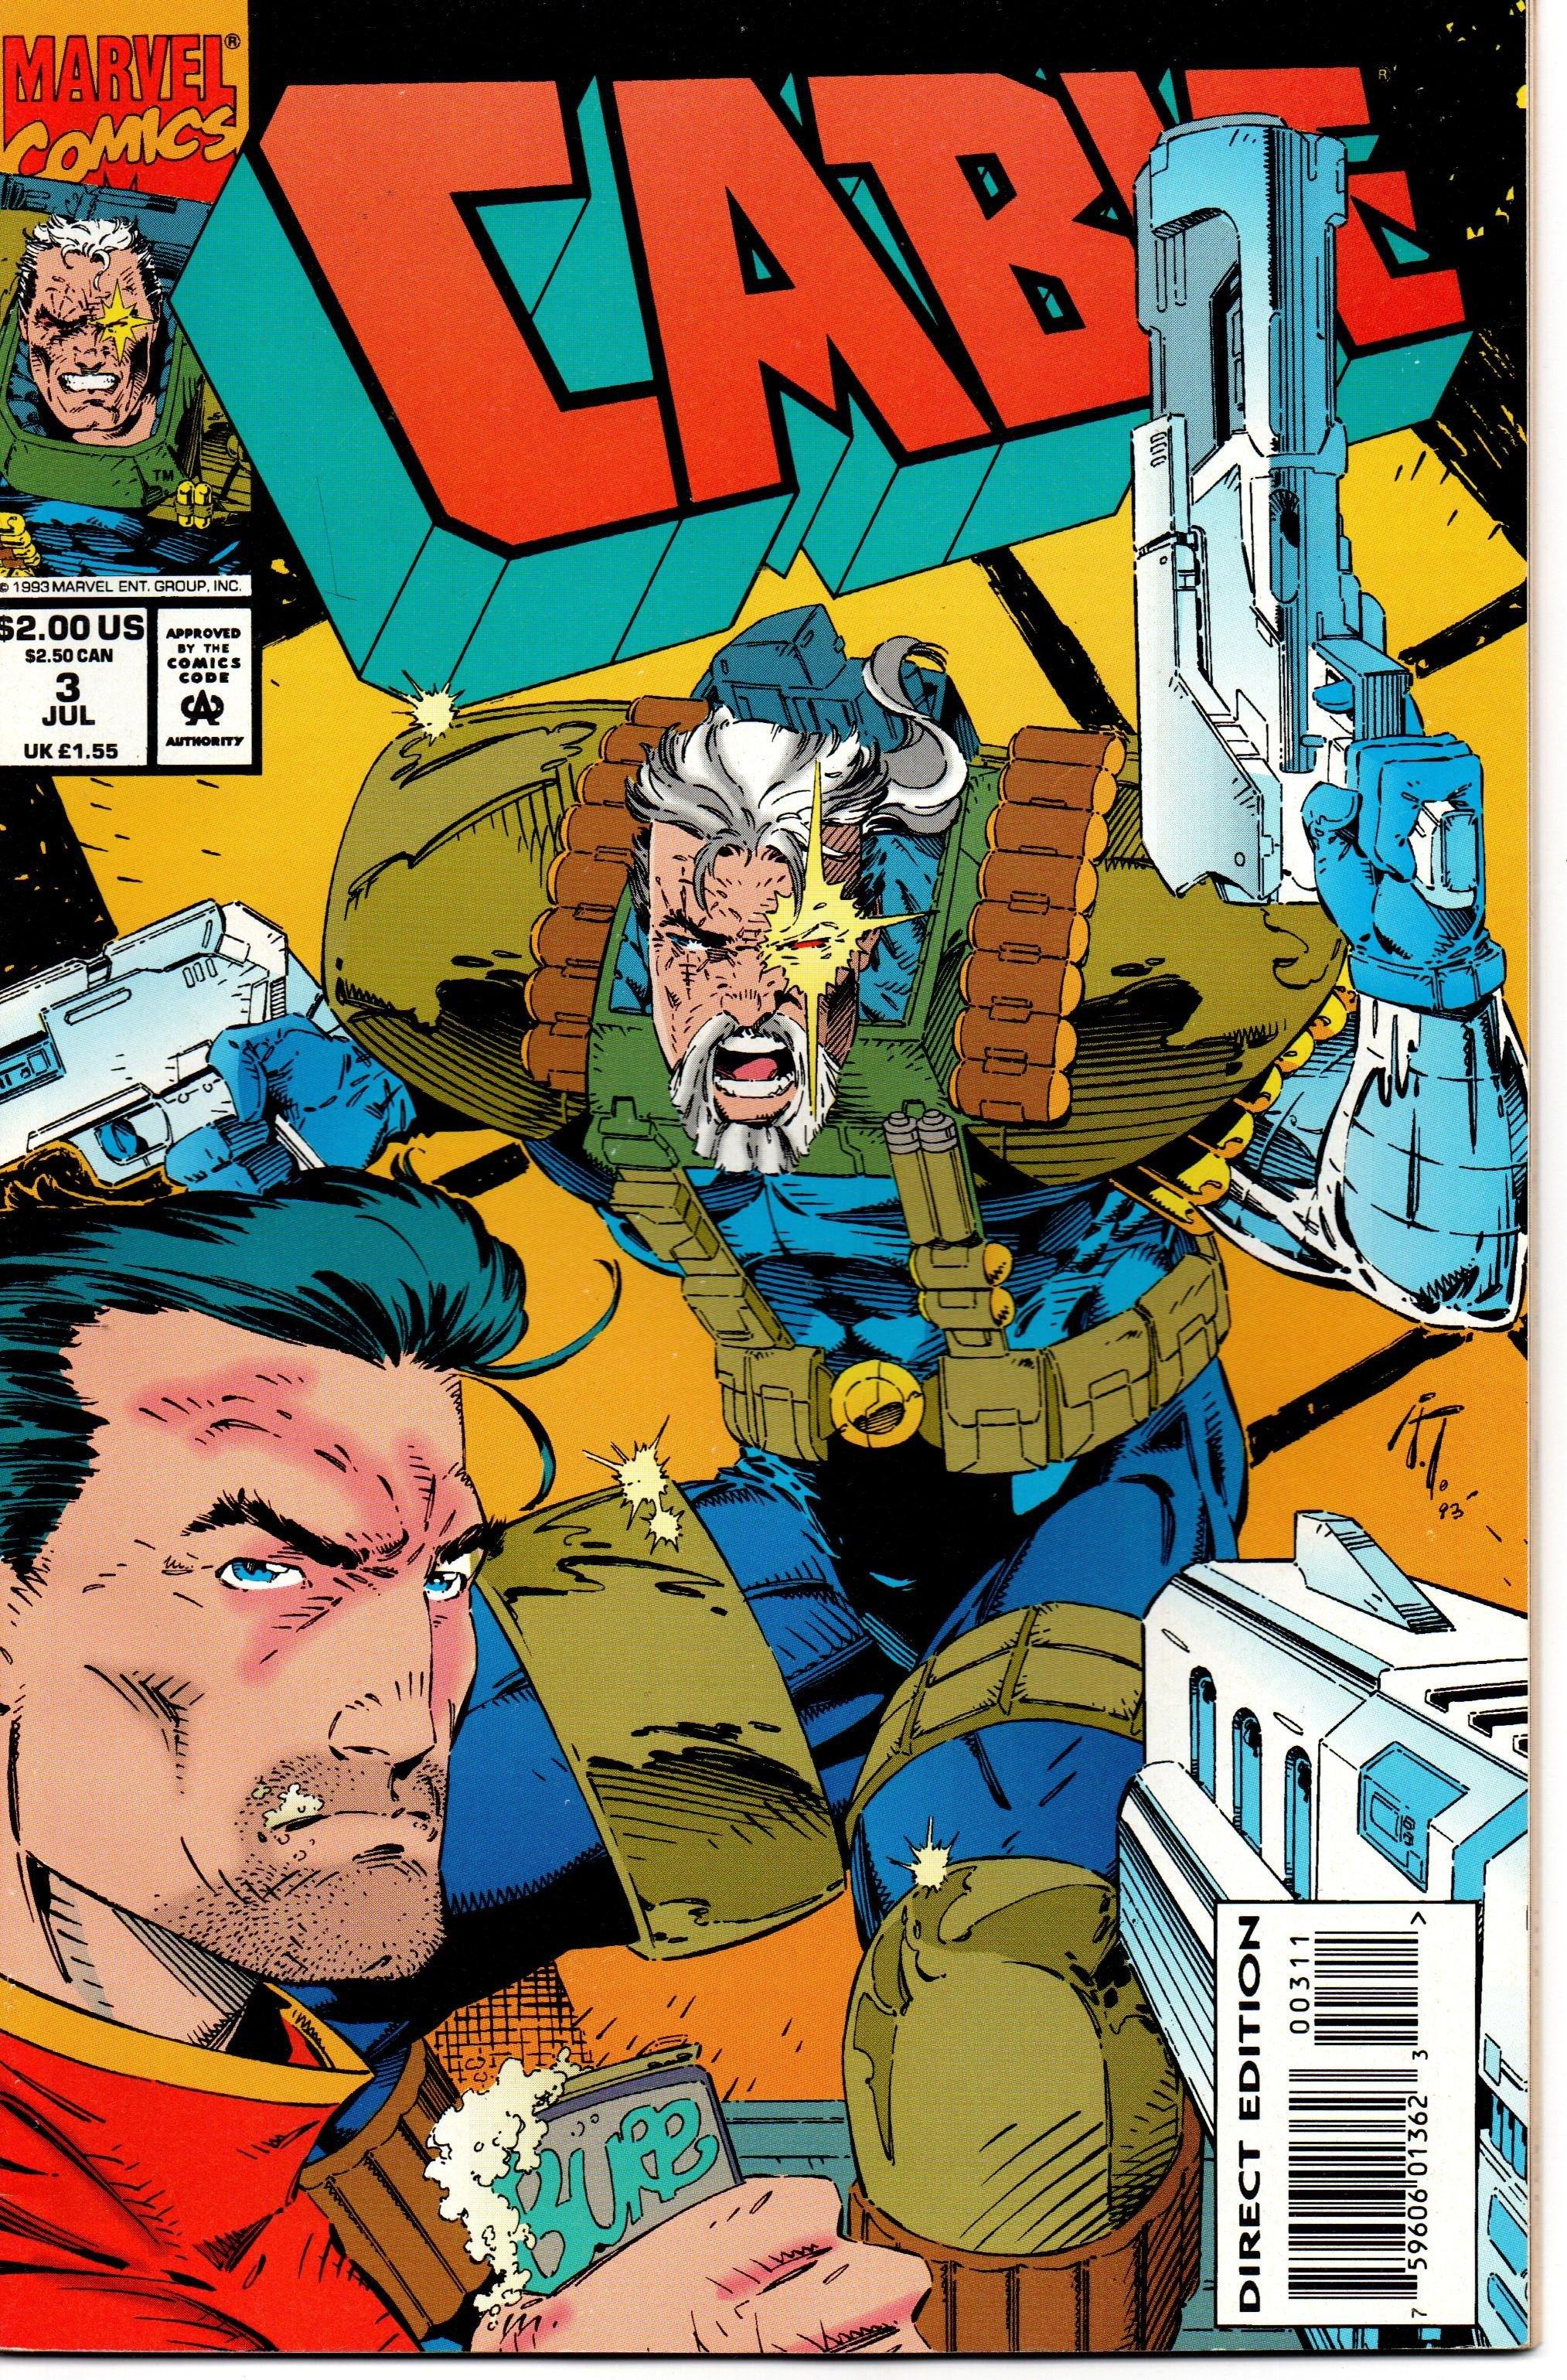 CABLE # 3 (1993 1ST SERIES) JUL 1993 [USED]